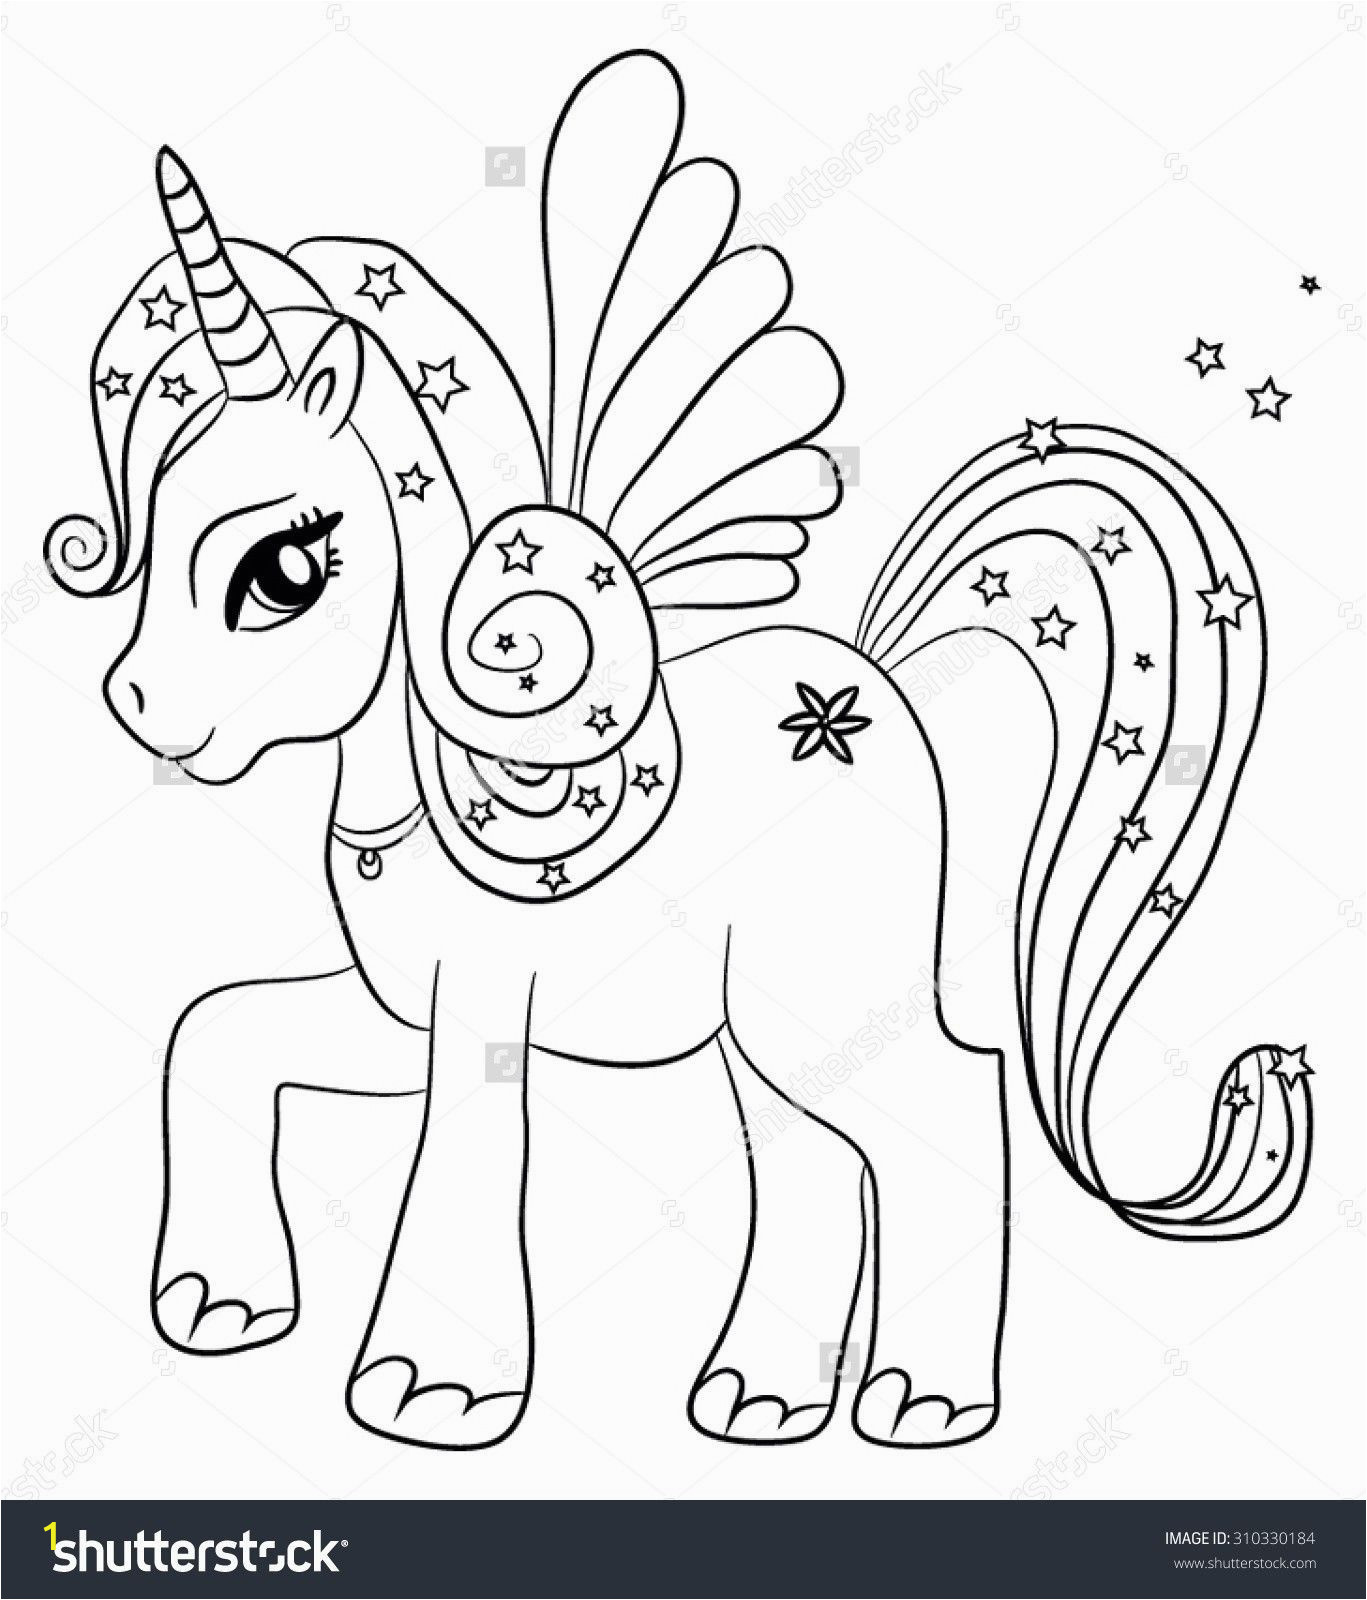 Detailed Unicorn Coloring Pages Coloring Pages Unicorns Print Saferbrowser Image Search